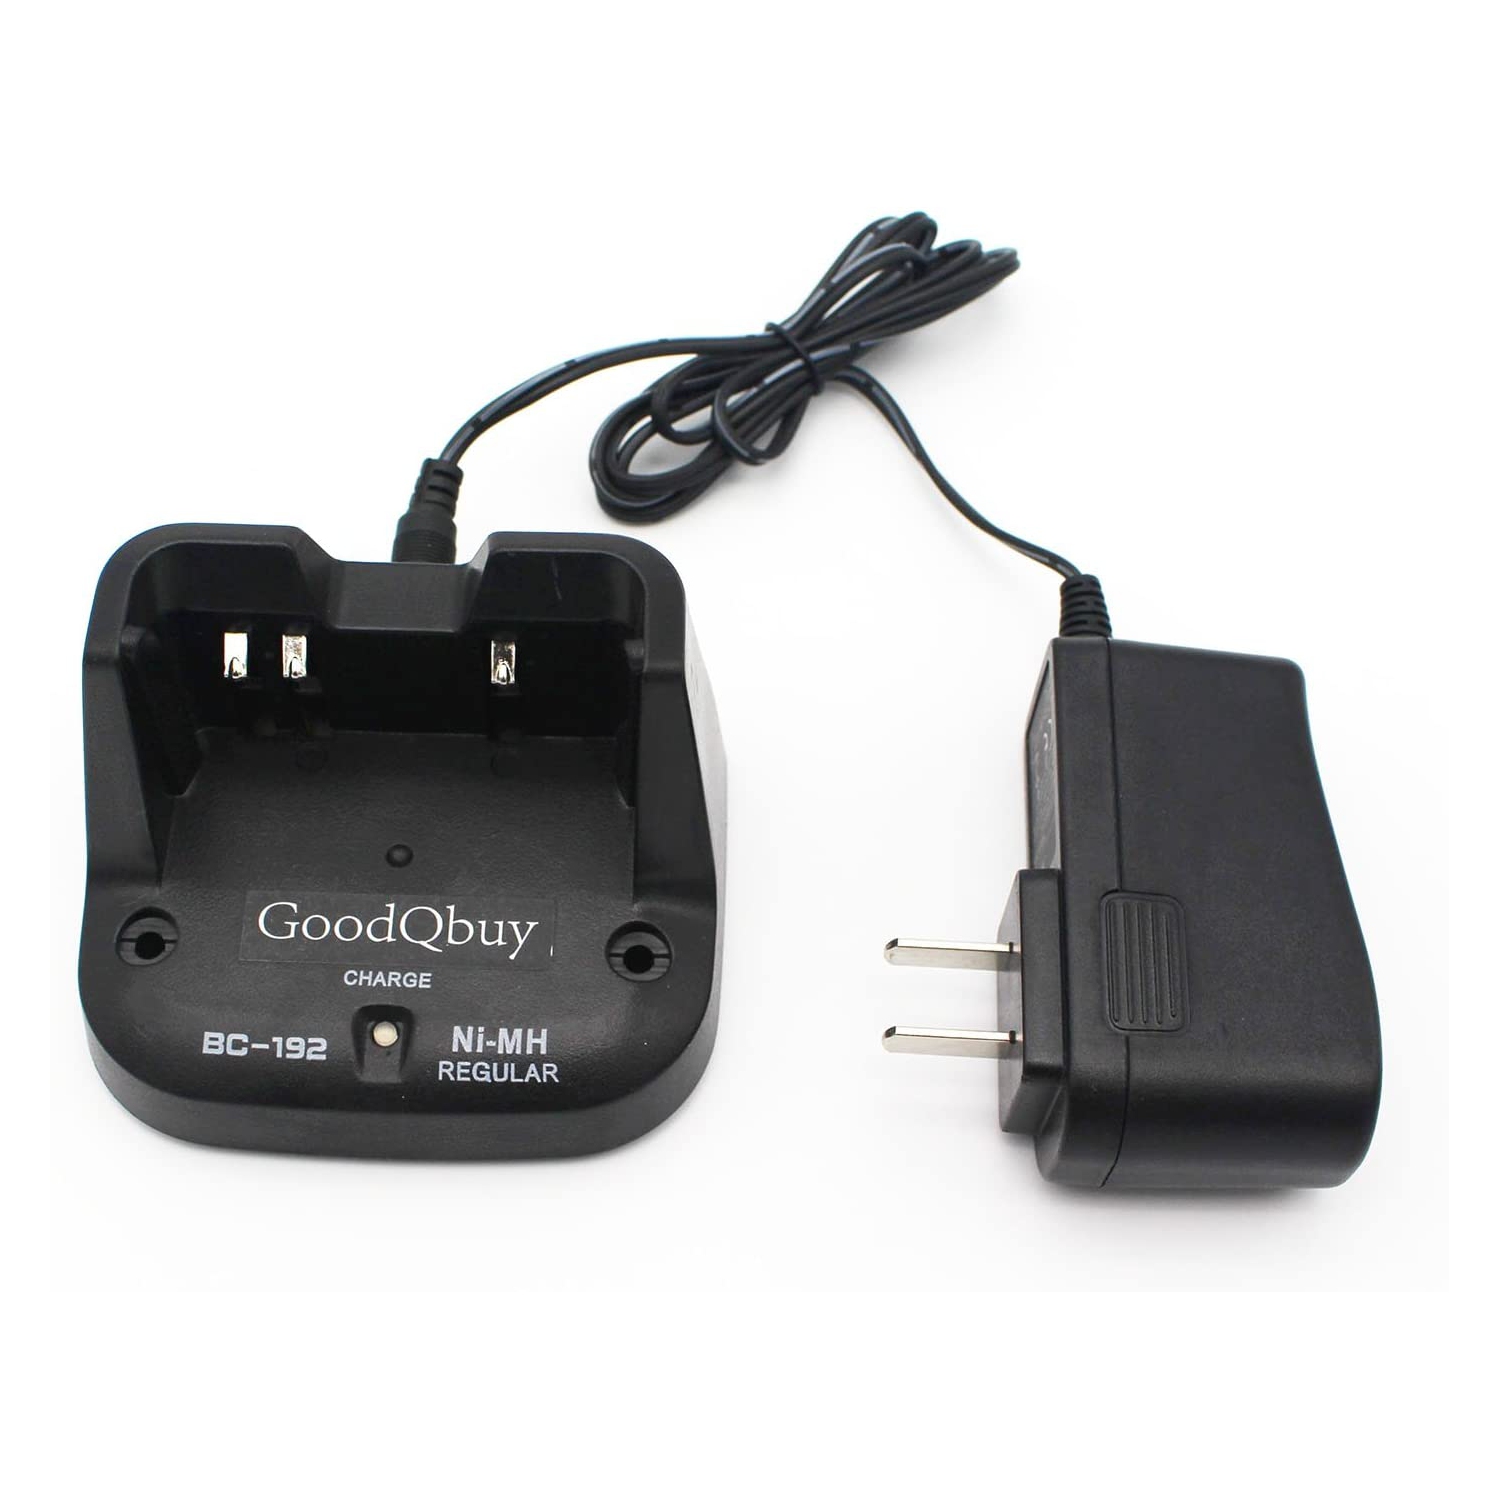 GoodQbuy Smart Battery Charger BC_192 for Icom Walkie Talkie F3001 F4001 F3101D F4104D F3002 F4002 F3003 F4003 IC_F27SR BP264